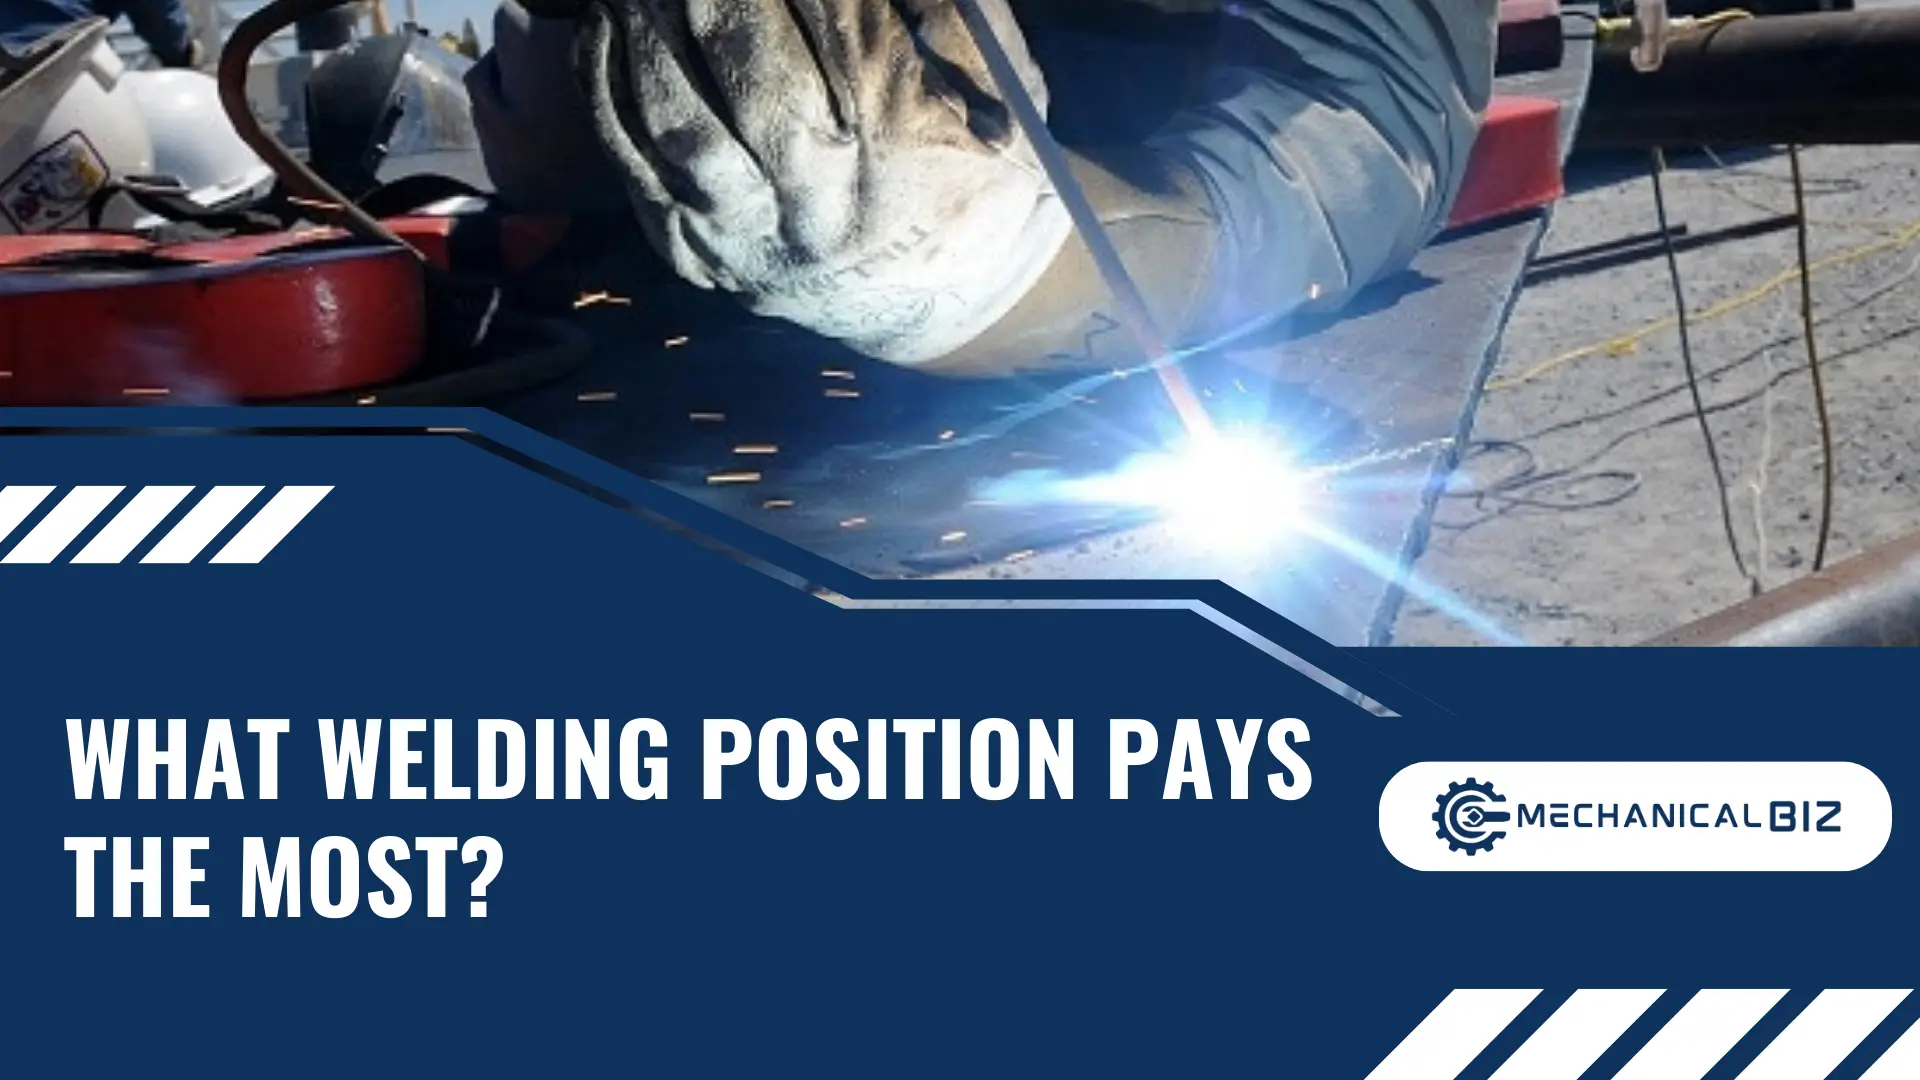 What Welding Position Pays the Most